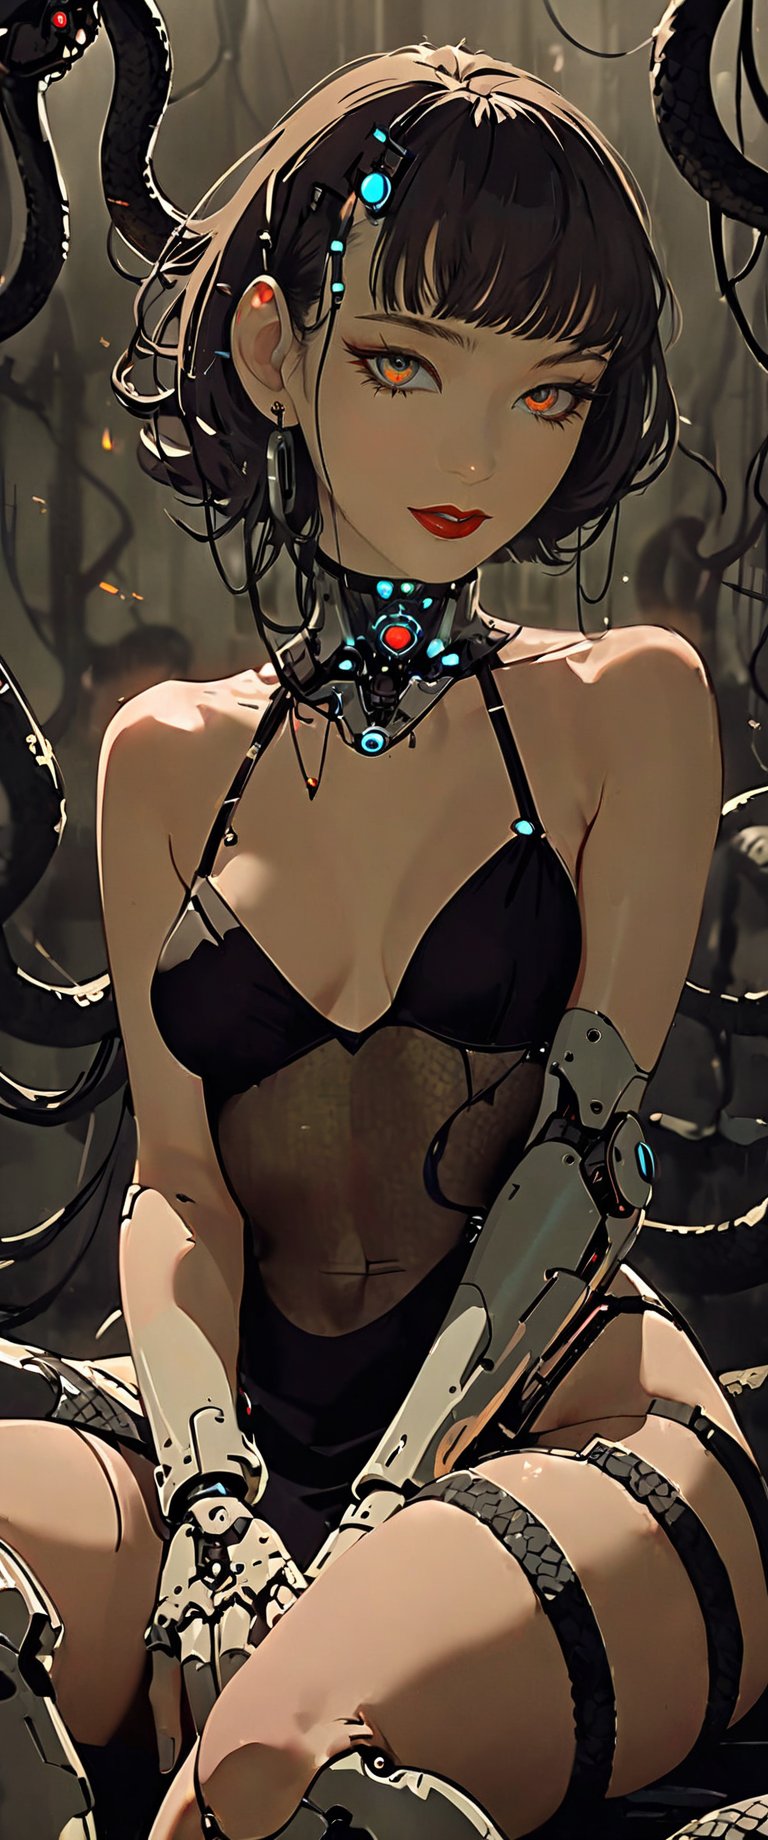 In a dimly lit, smoky cyberpunk club, a femme fatale cyborg sits solo, her mechanical joints gleaming in the flickering light. Her striking features, framed by short hair and bangs, are adorned with jewelry and a black choker. A cigarette dangles from her lips as she pets a snake that gazes directly at the viewer. She wears a revealing seethrough kimono, paired with Japanese-style earrings, and holds a katana surrounded by the dark, gritty atmosphere. Her gaze is sultry, exuding an air of sexy sophistication, as if inviting the viewer to enter her world. The scene is set in a Conrad Roset-inspired style, with a focus on dark, muted tones and industrial textures.,core_9,scary, (masterpiece:1.2),schpicy style